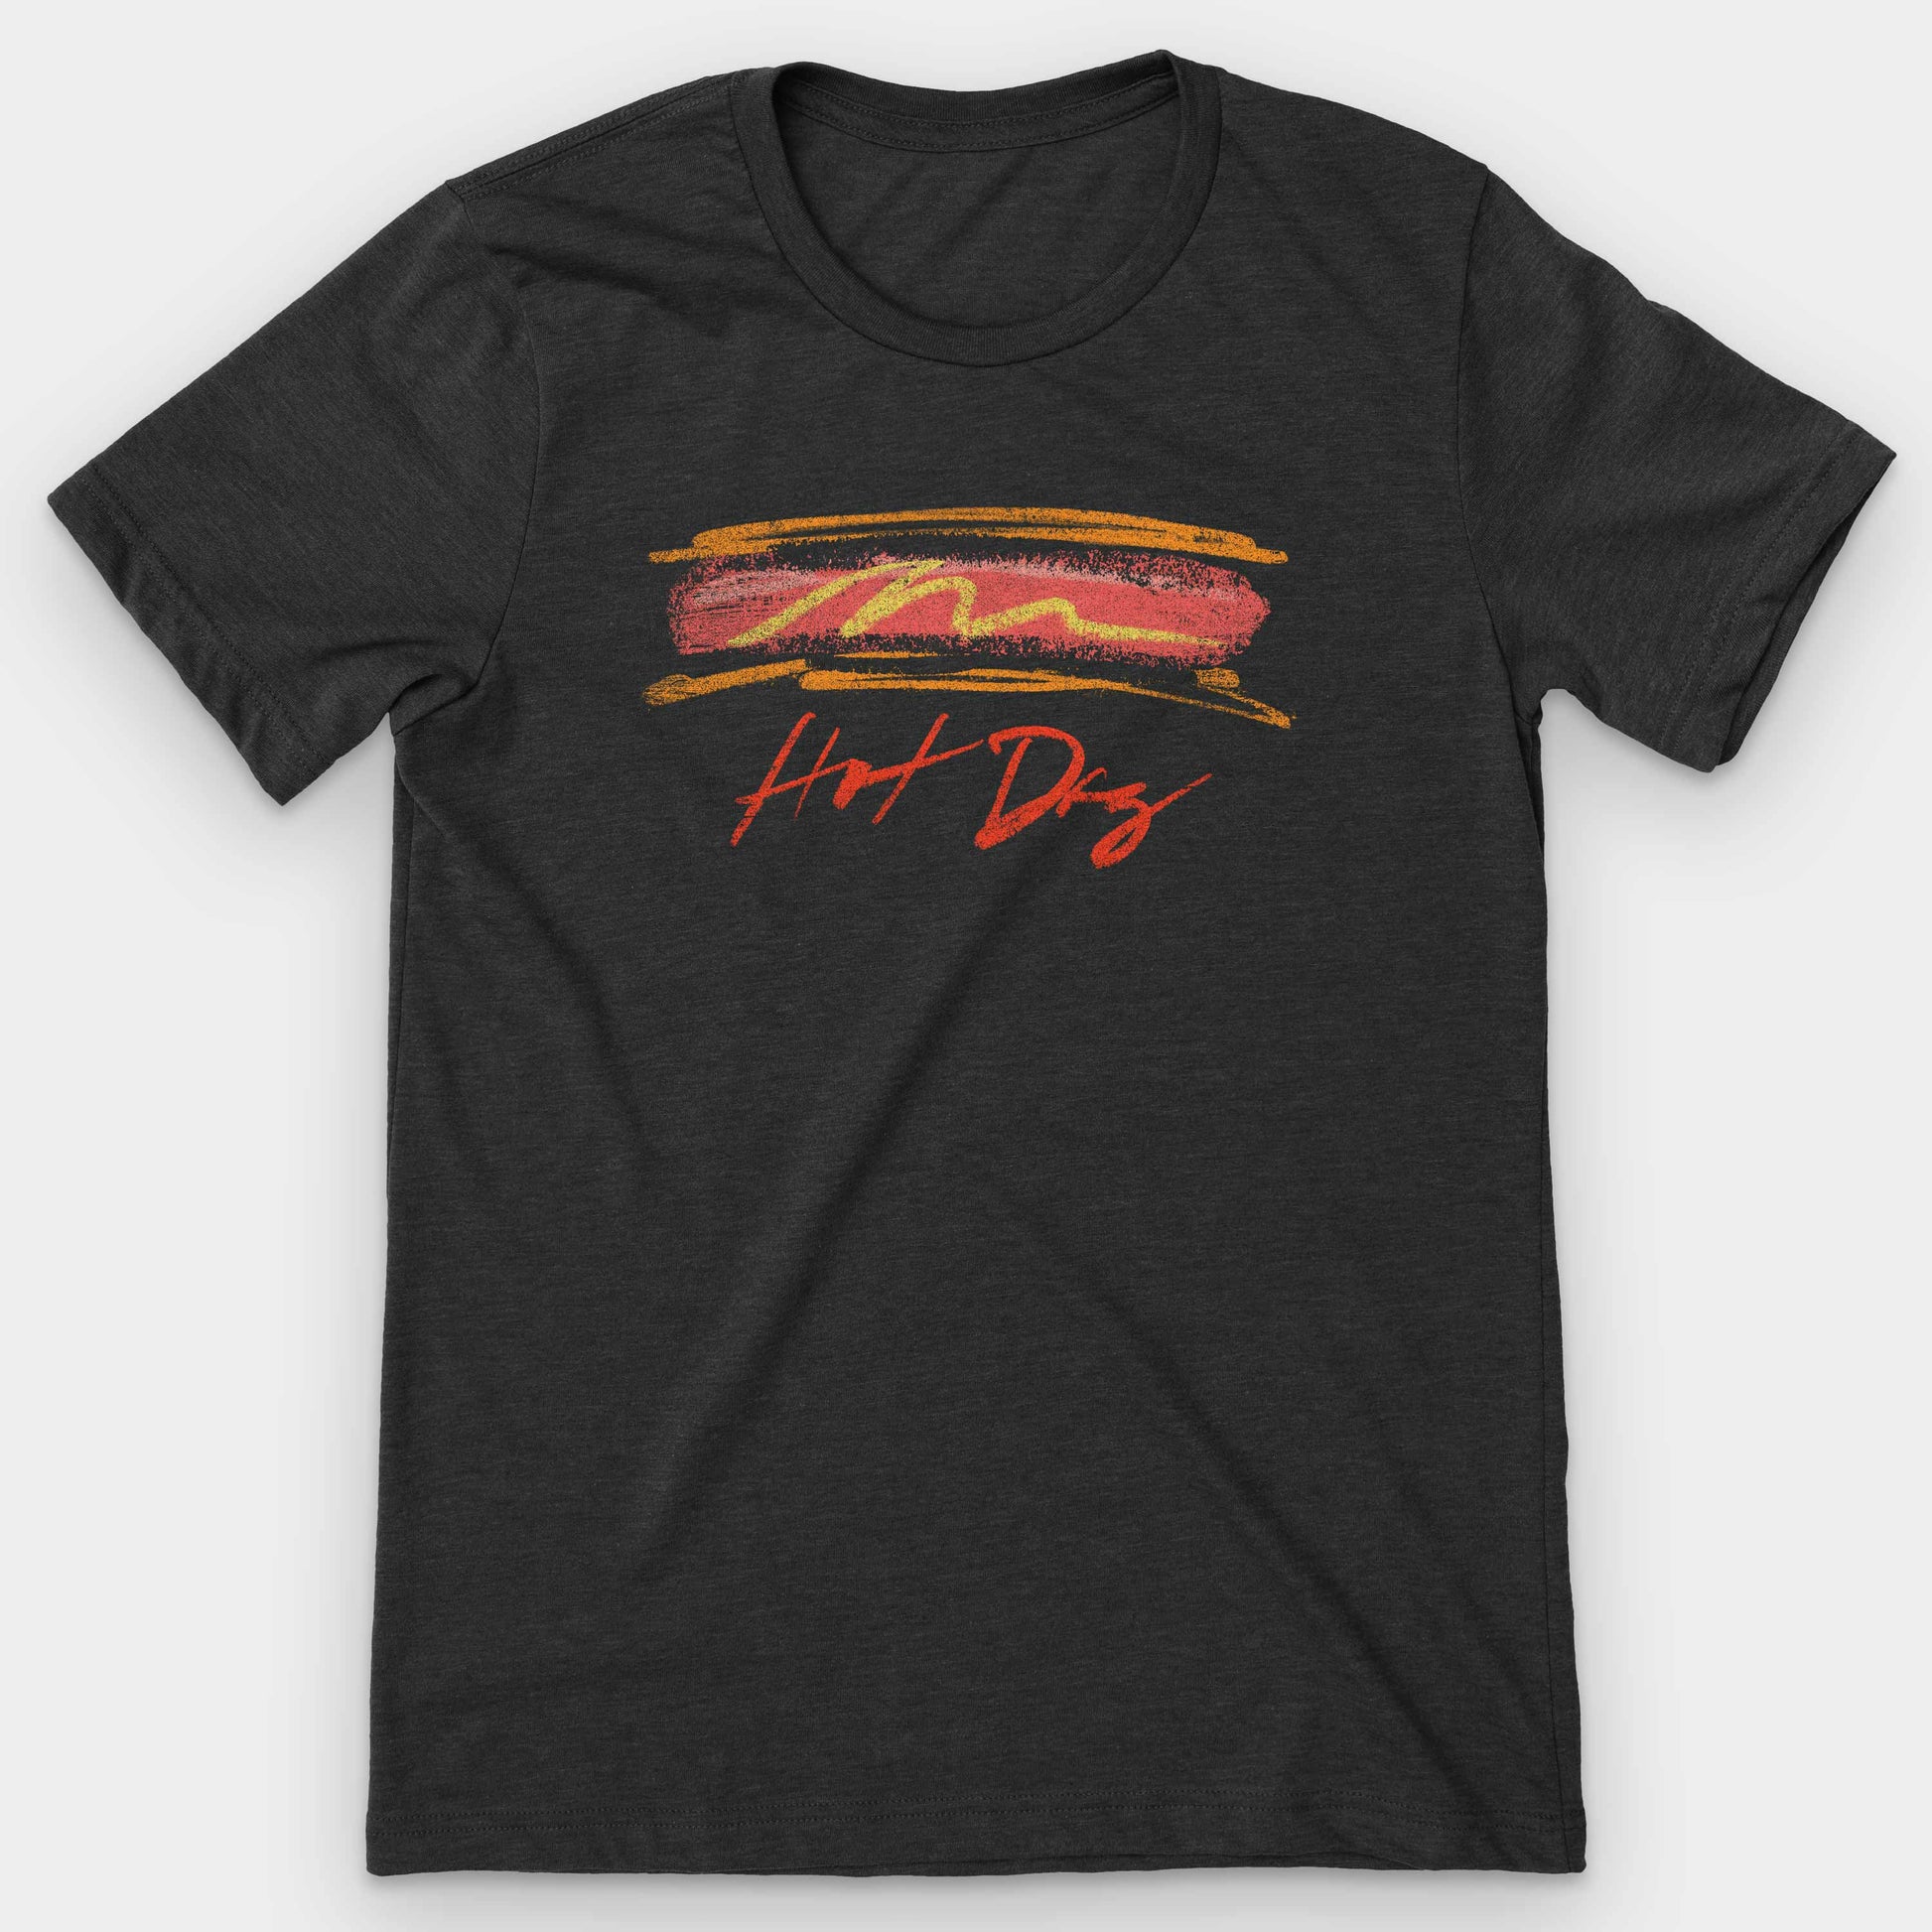  Hot Dog Graphic T-Shirt by Snaxtime